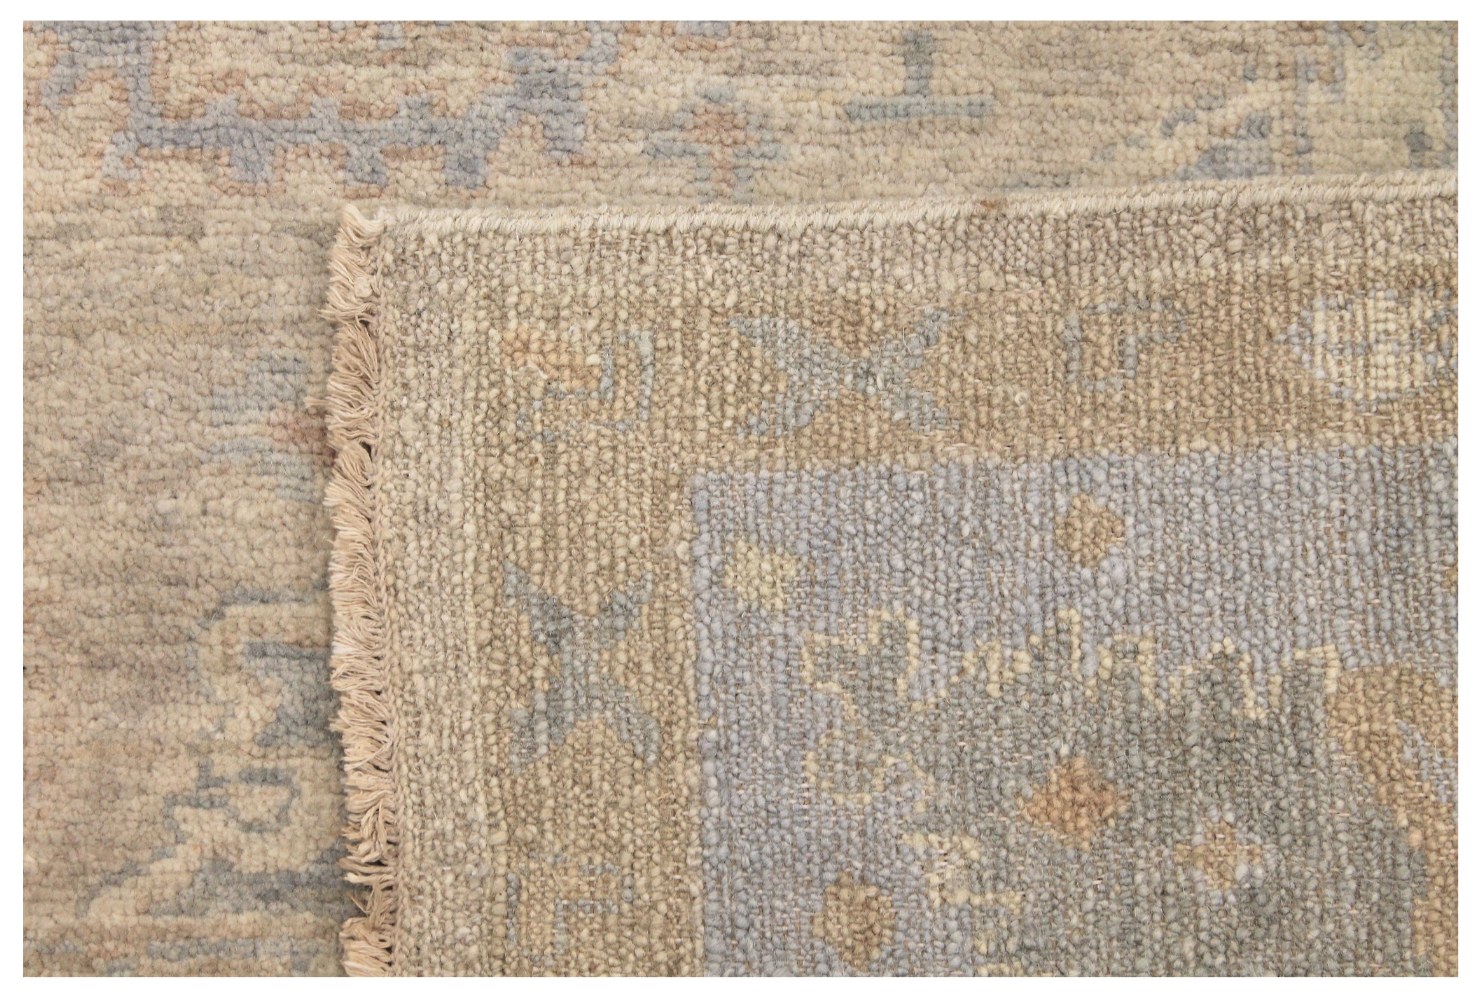 8x10 Oushak Hand Knotted Wool Area Rug - MR028513